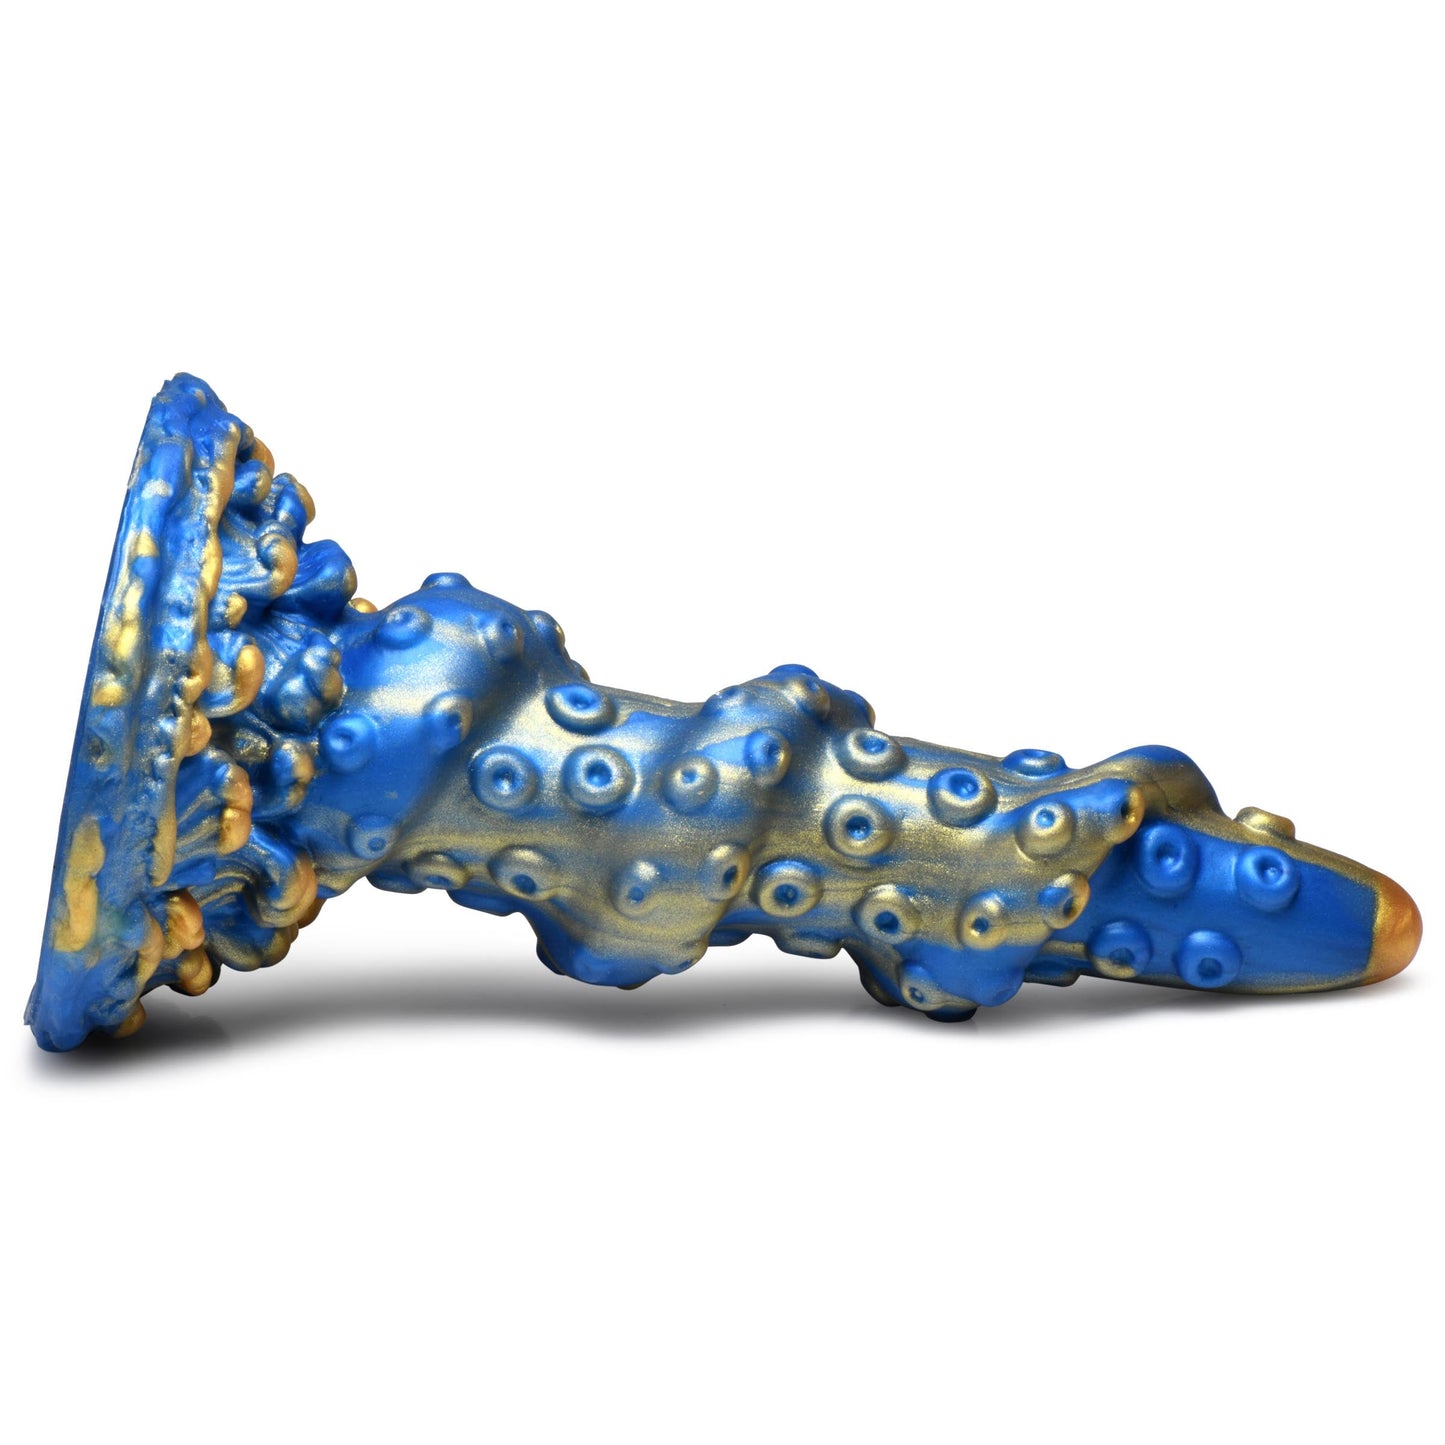 Lord Kraken Tentacled Silicone Creature Dildo